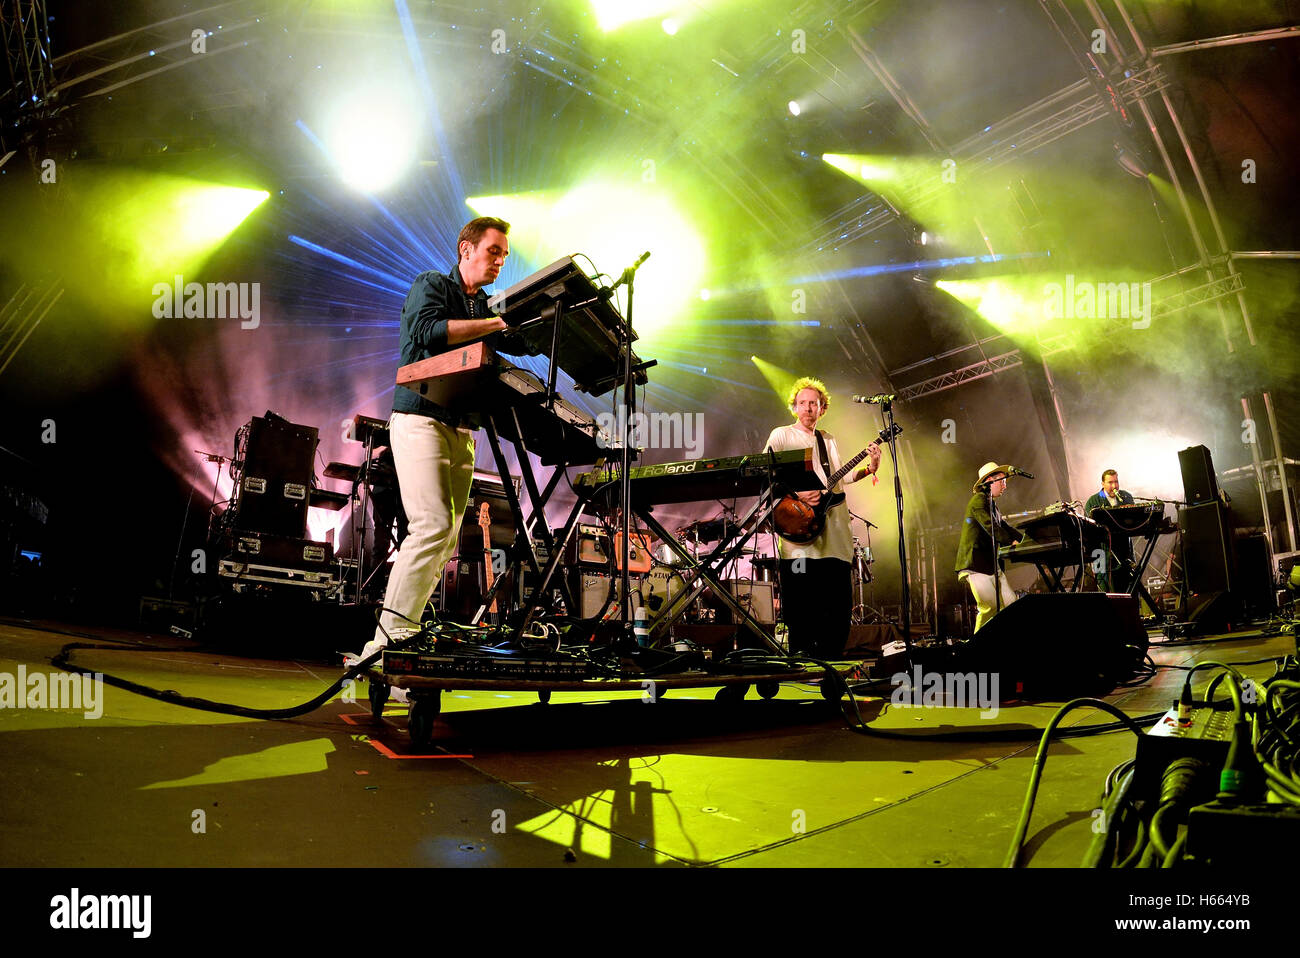 BARCELONA - JUN 19: Hot Chip (electronic music band) performs at Sonar Festival on June 19, 2015 in Barcelona, Spain. Stock Photo